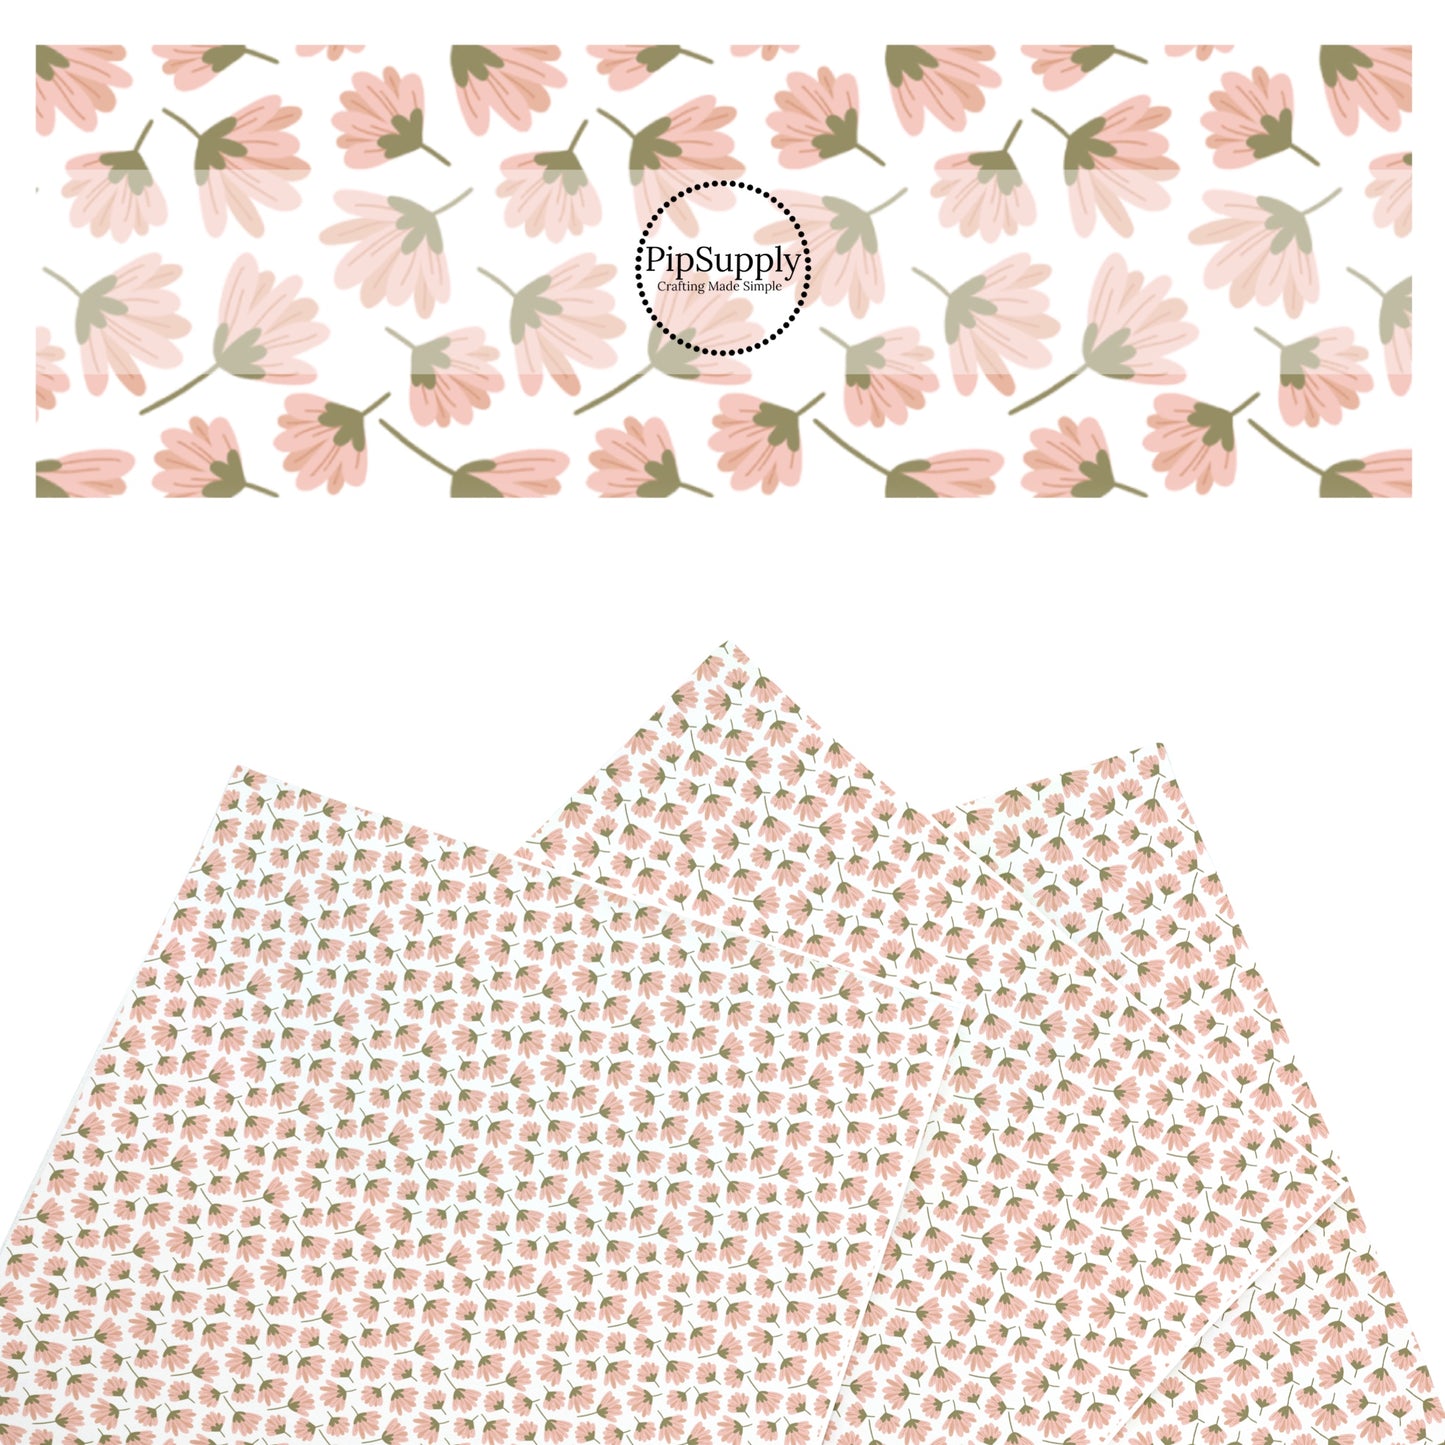 These summer faux leather sheets contain the following design elements: pink wildflowers on white. Our CPSIA compliant faux leather sheets or rolls can be used for all types of crafting projects.